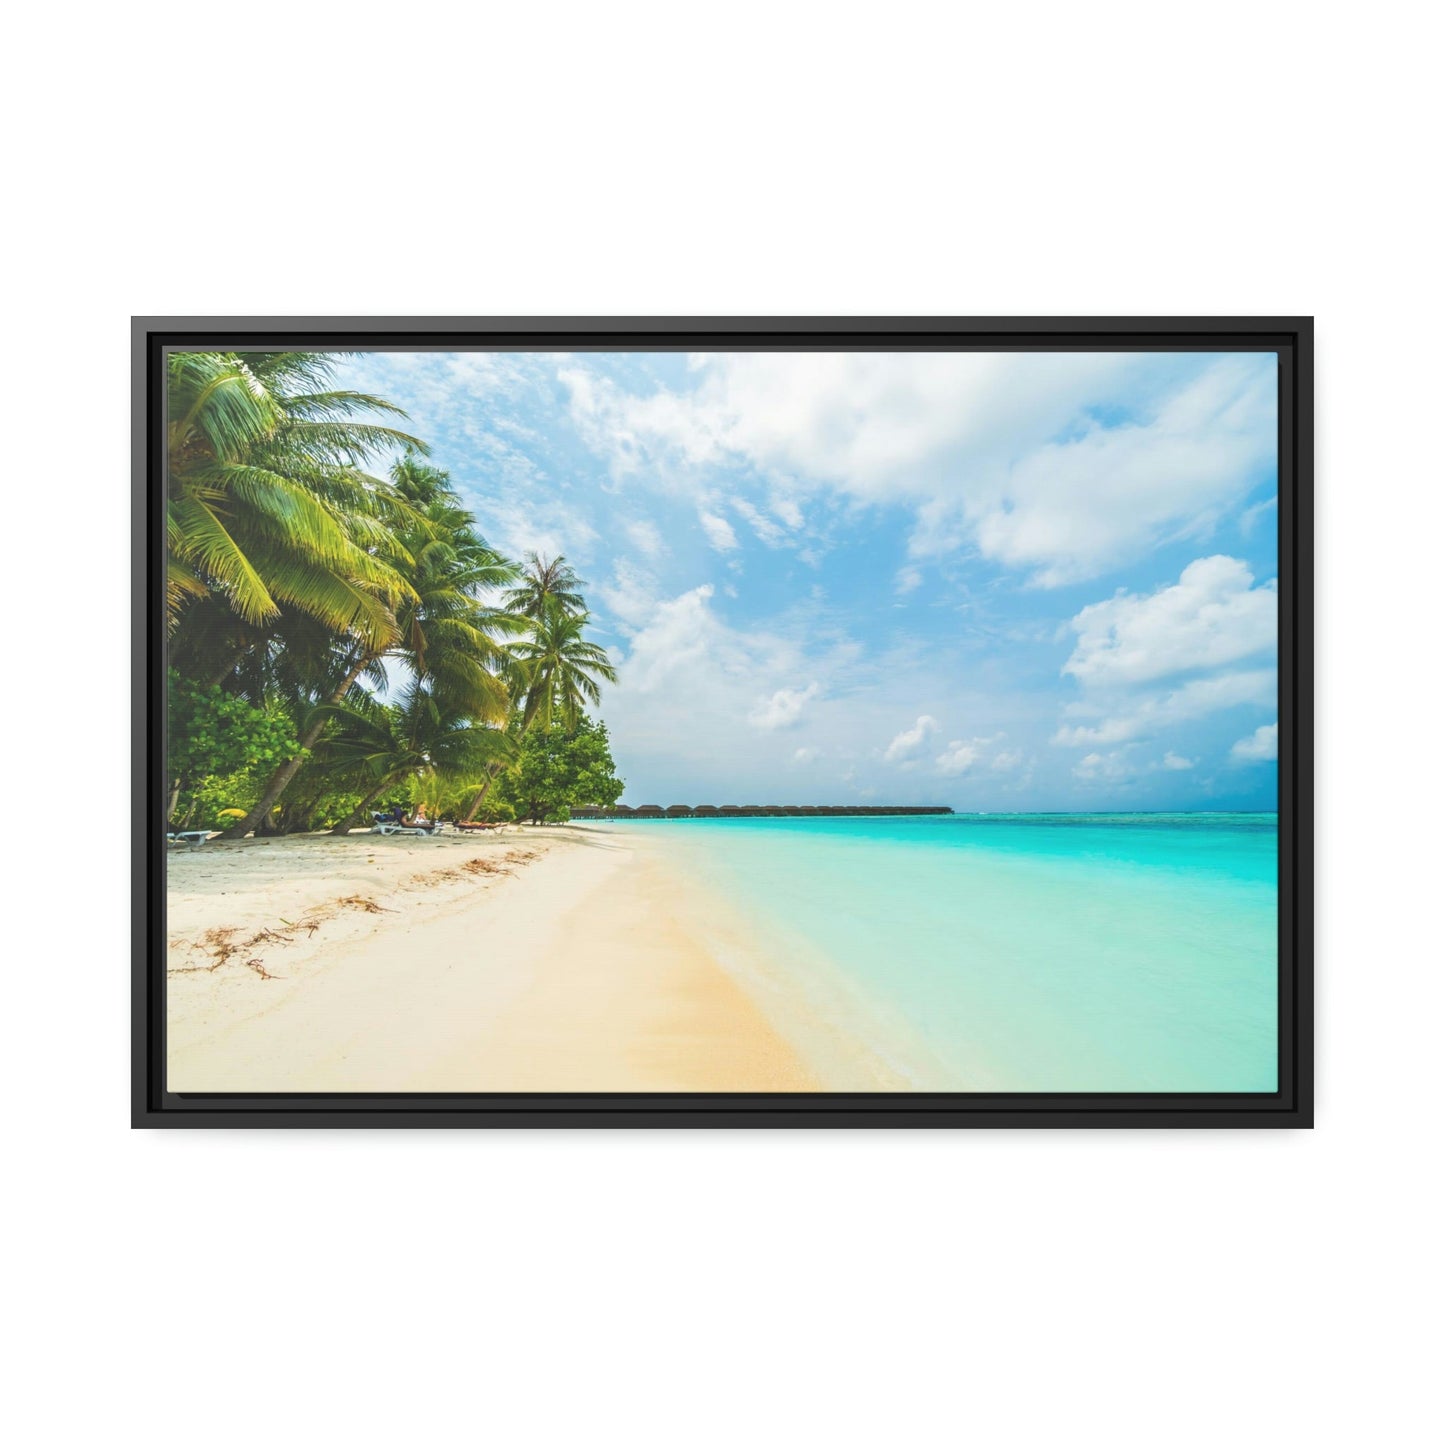 Tropical Paradise: Framed Canvas and Print on Canvas of Caribbean Wall Art